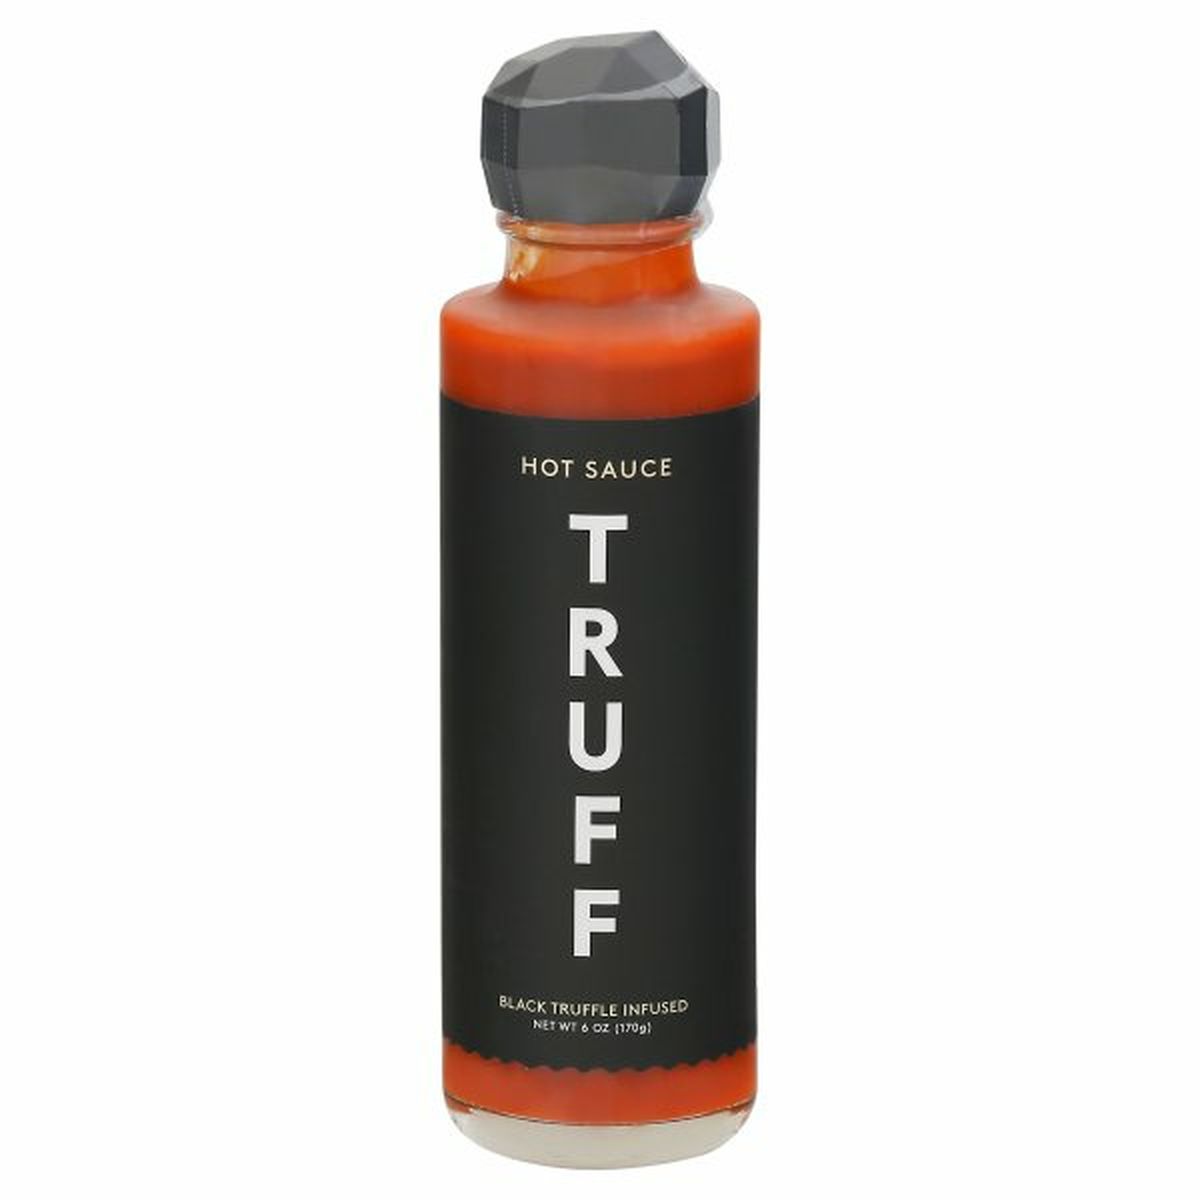 Calories in TRUFF Hot Sauce, Black Truffle Infused